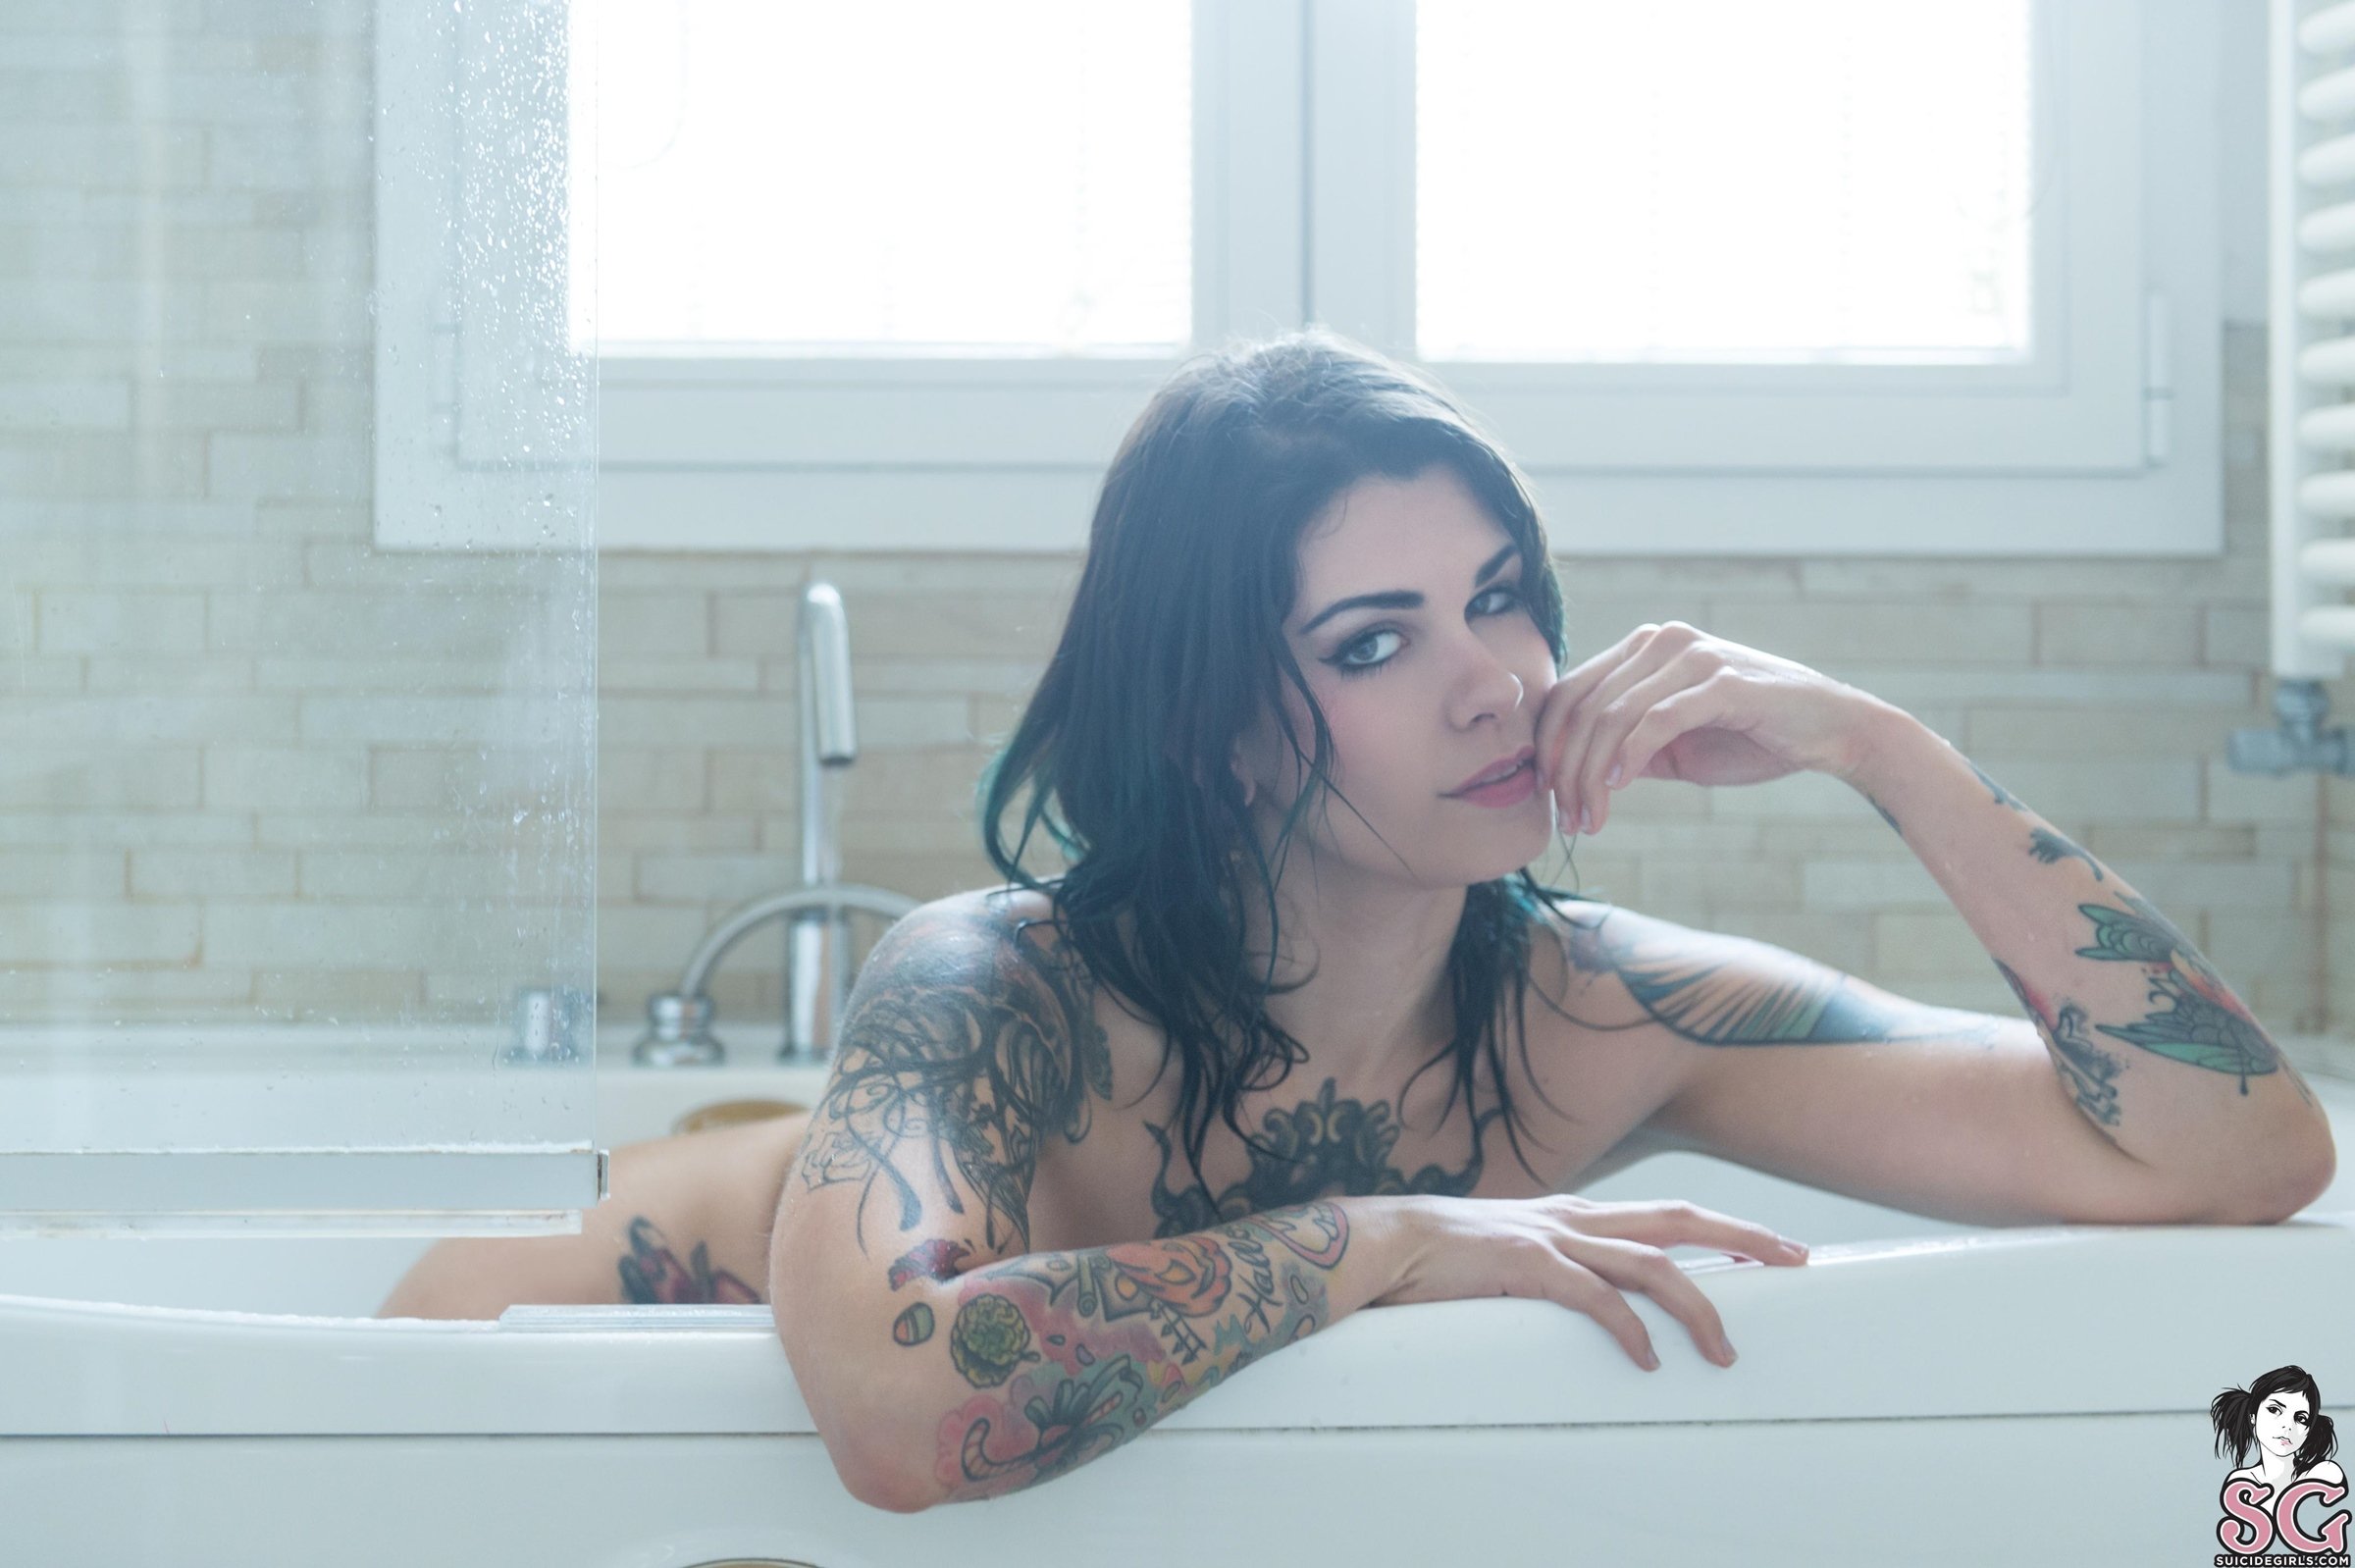 Image Beautiful Suicide Girl Ultima Snake Bite (35) High resolution lossles...